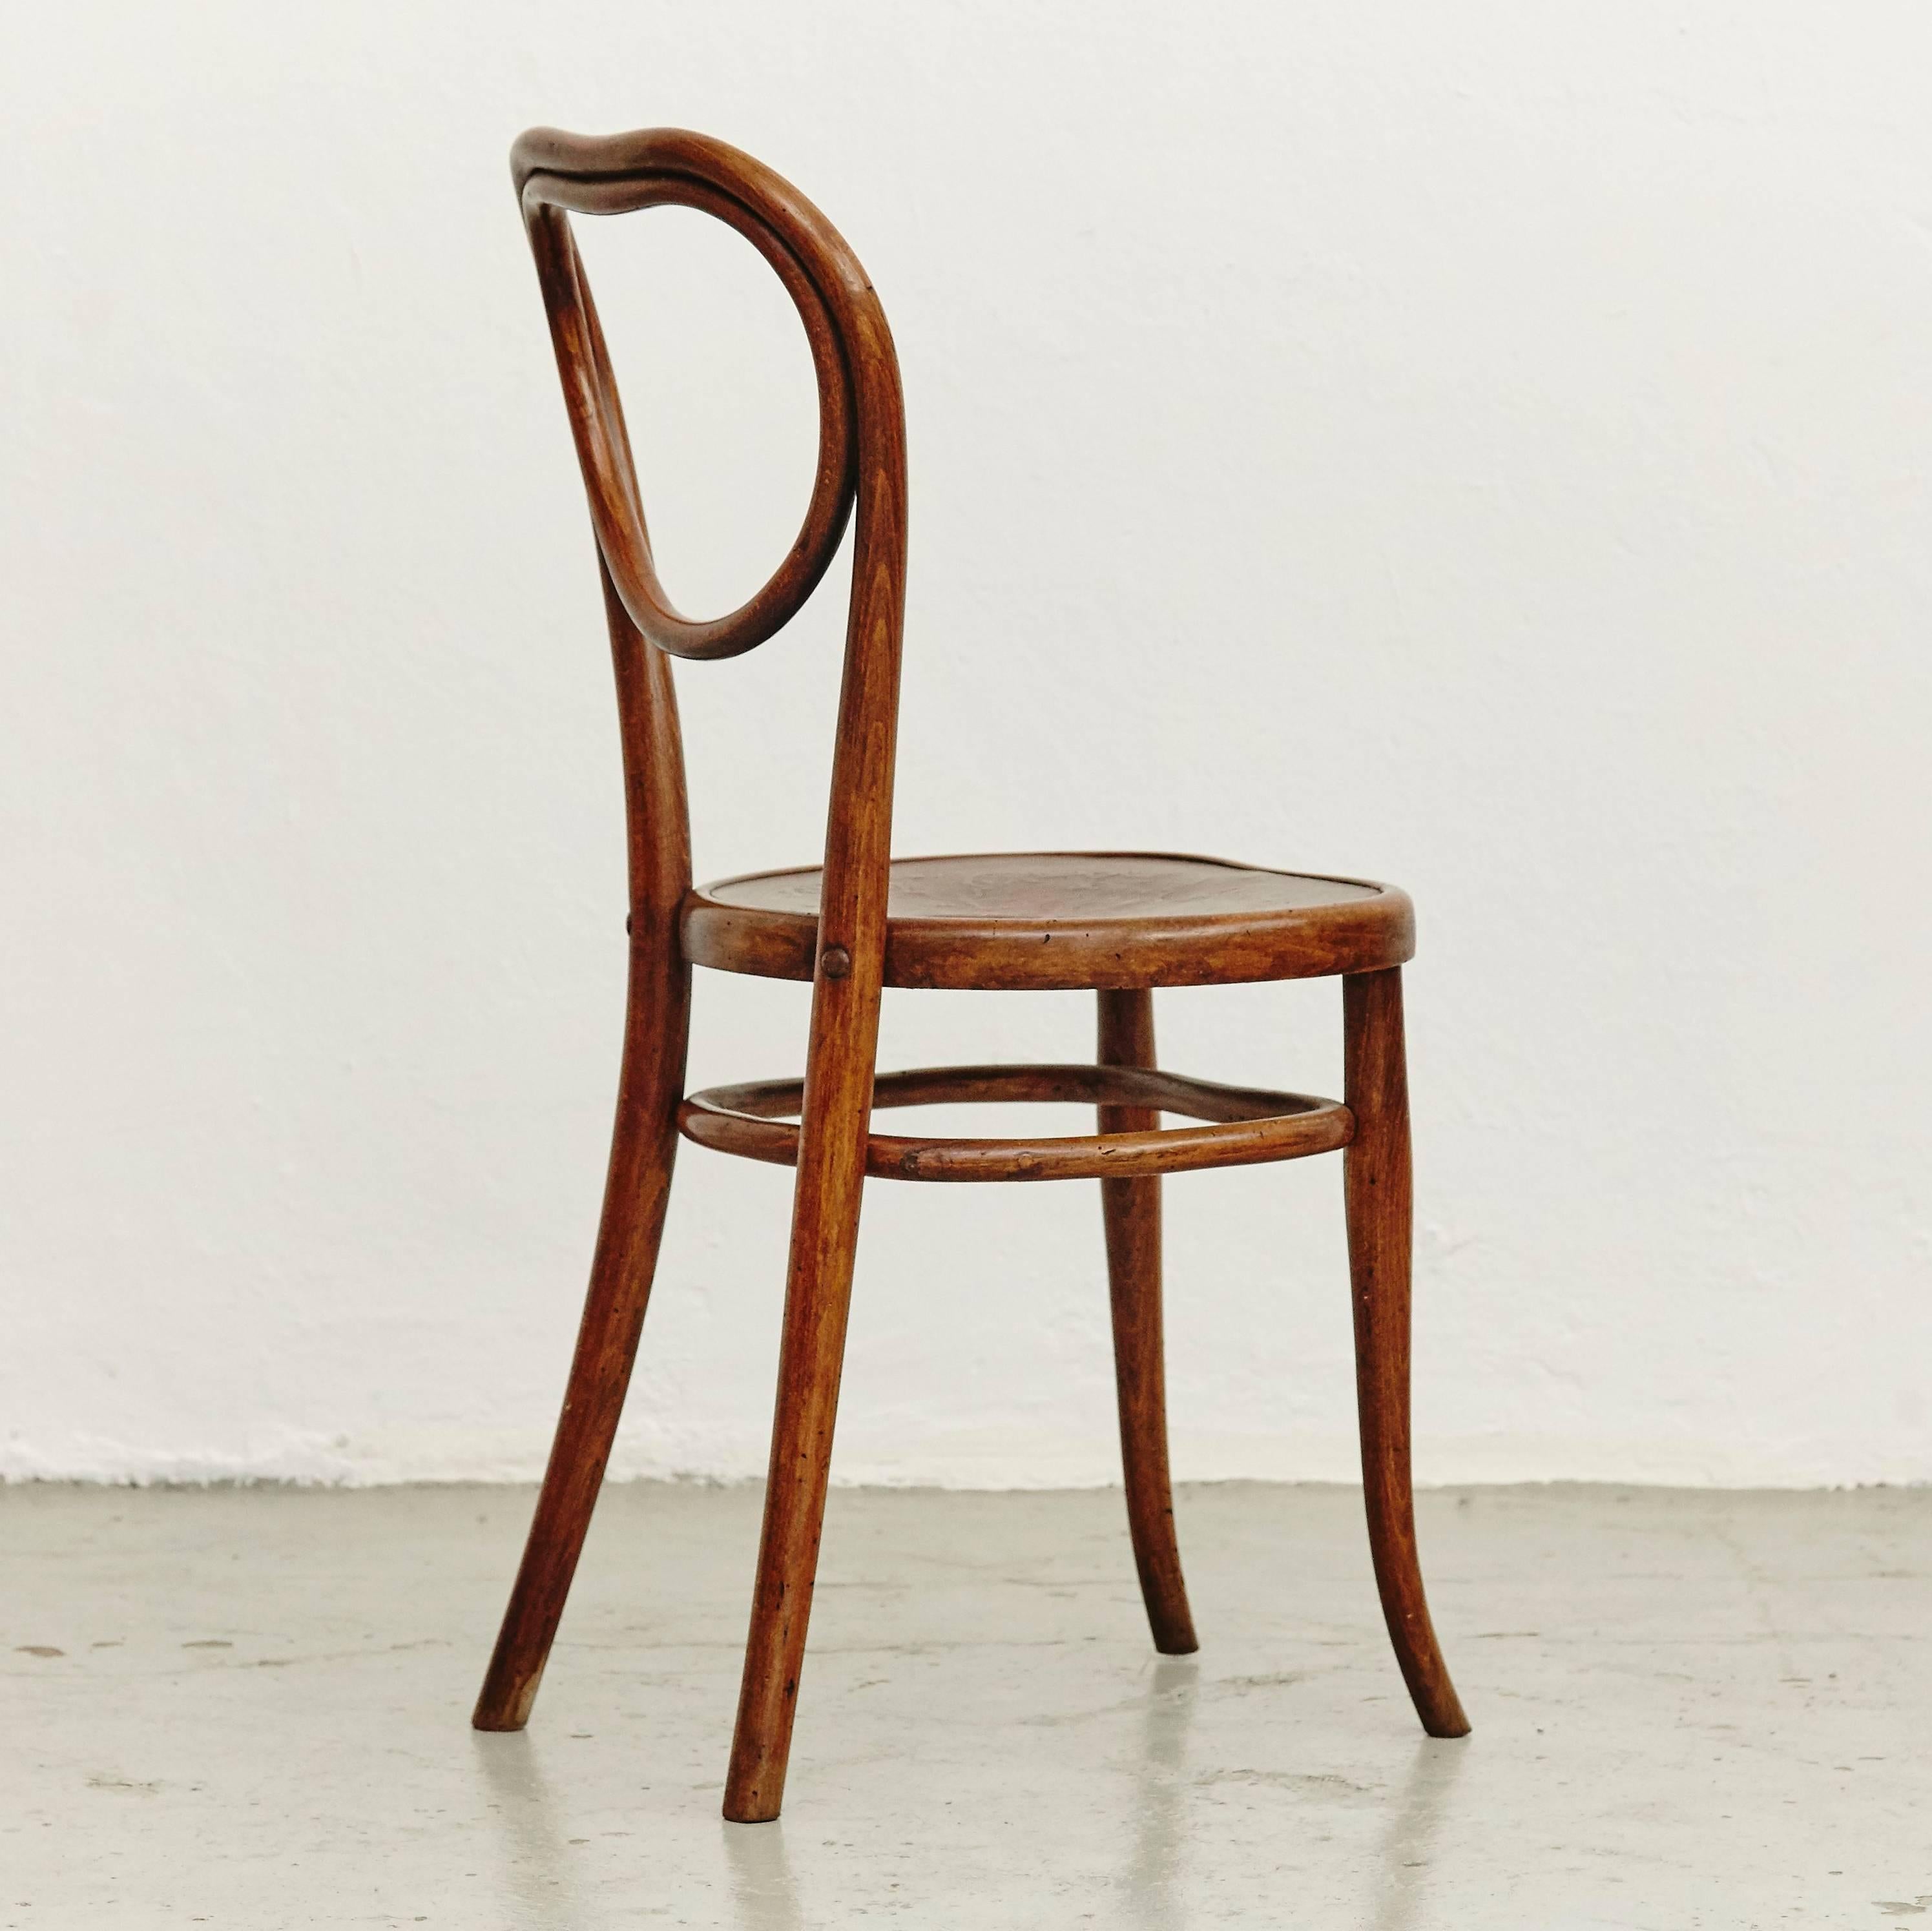 Thonet chair, manufactured by Thonet, circa 1920.
Bentwood.

It preserves the original label to the underside.

In good original condition, with minor wear consistent with age and use, preserving a beautiful patina.

Thonet was the son of